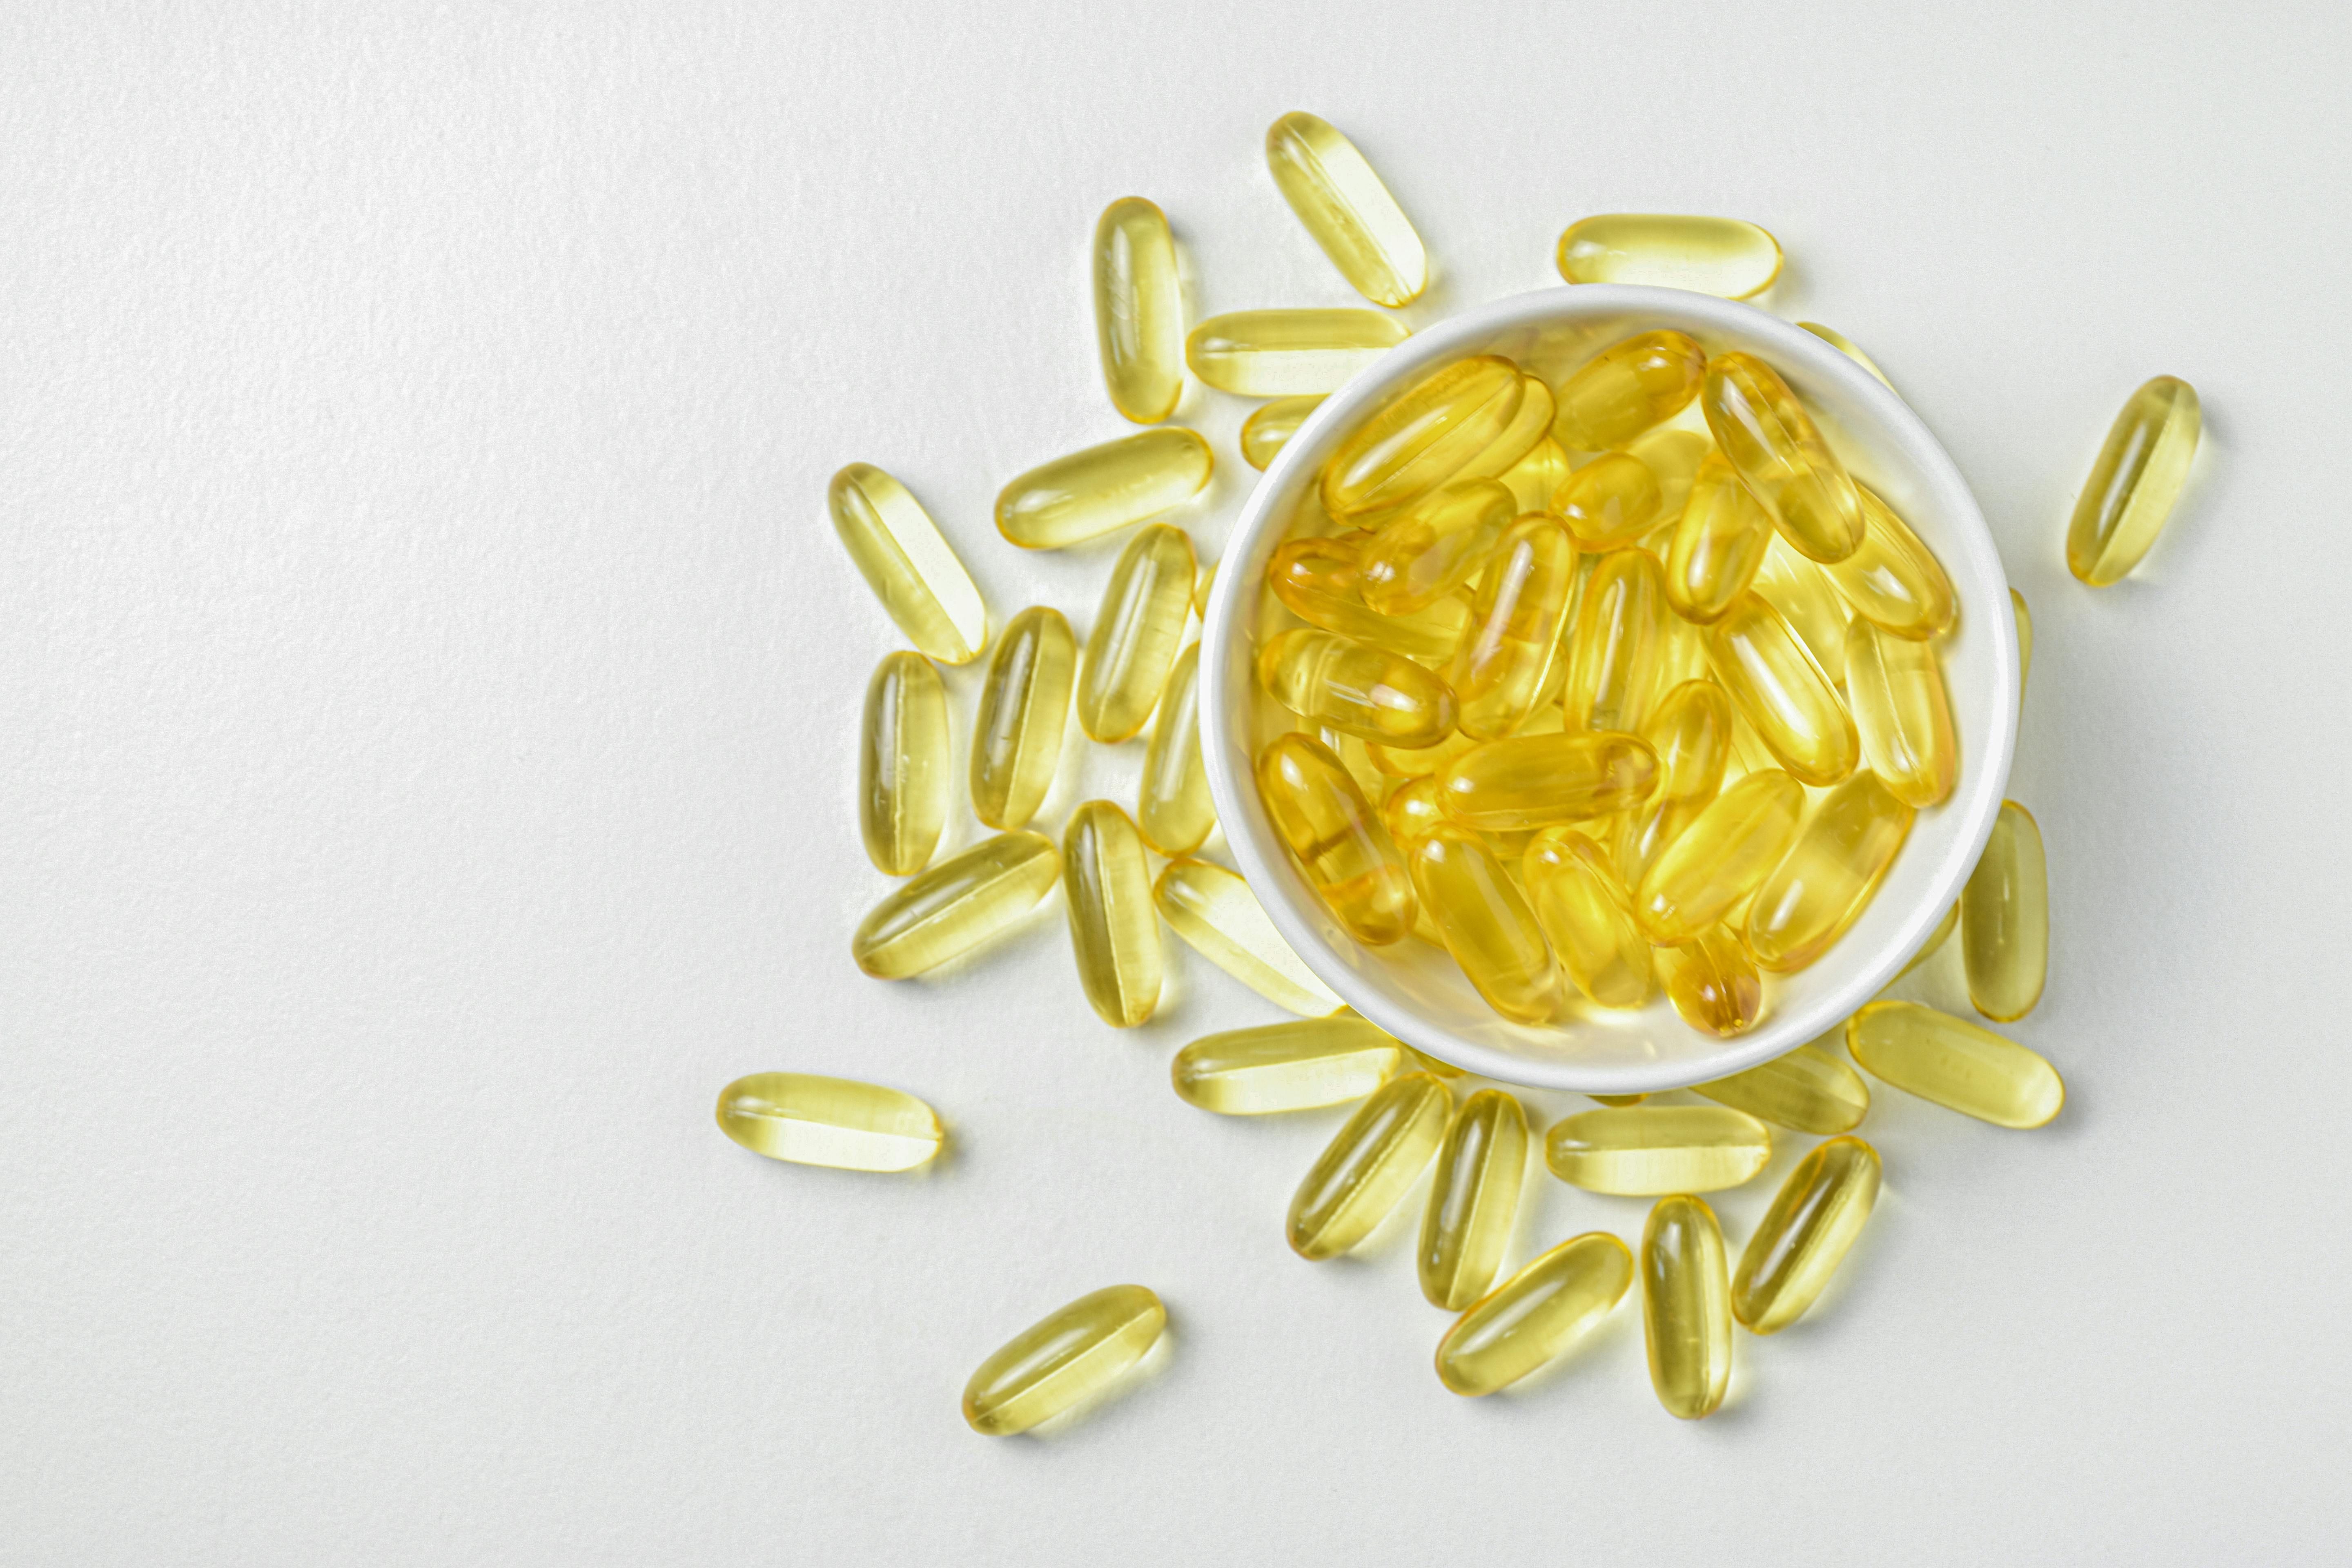 Assorted Omega 3 supplements displayed, ideal fish oil alternatives for women focusing on health and wellness.